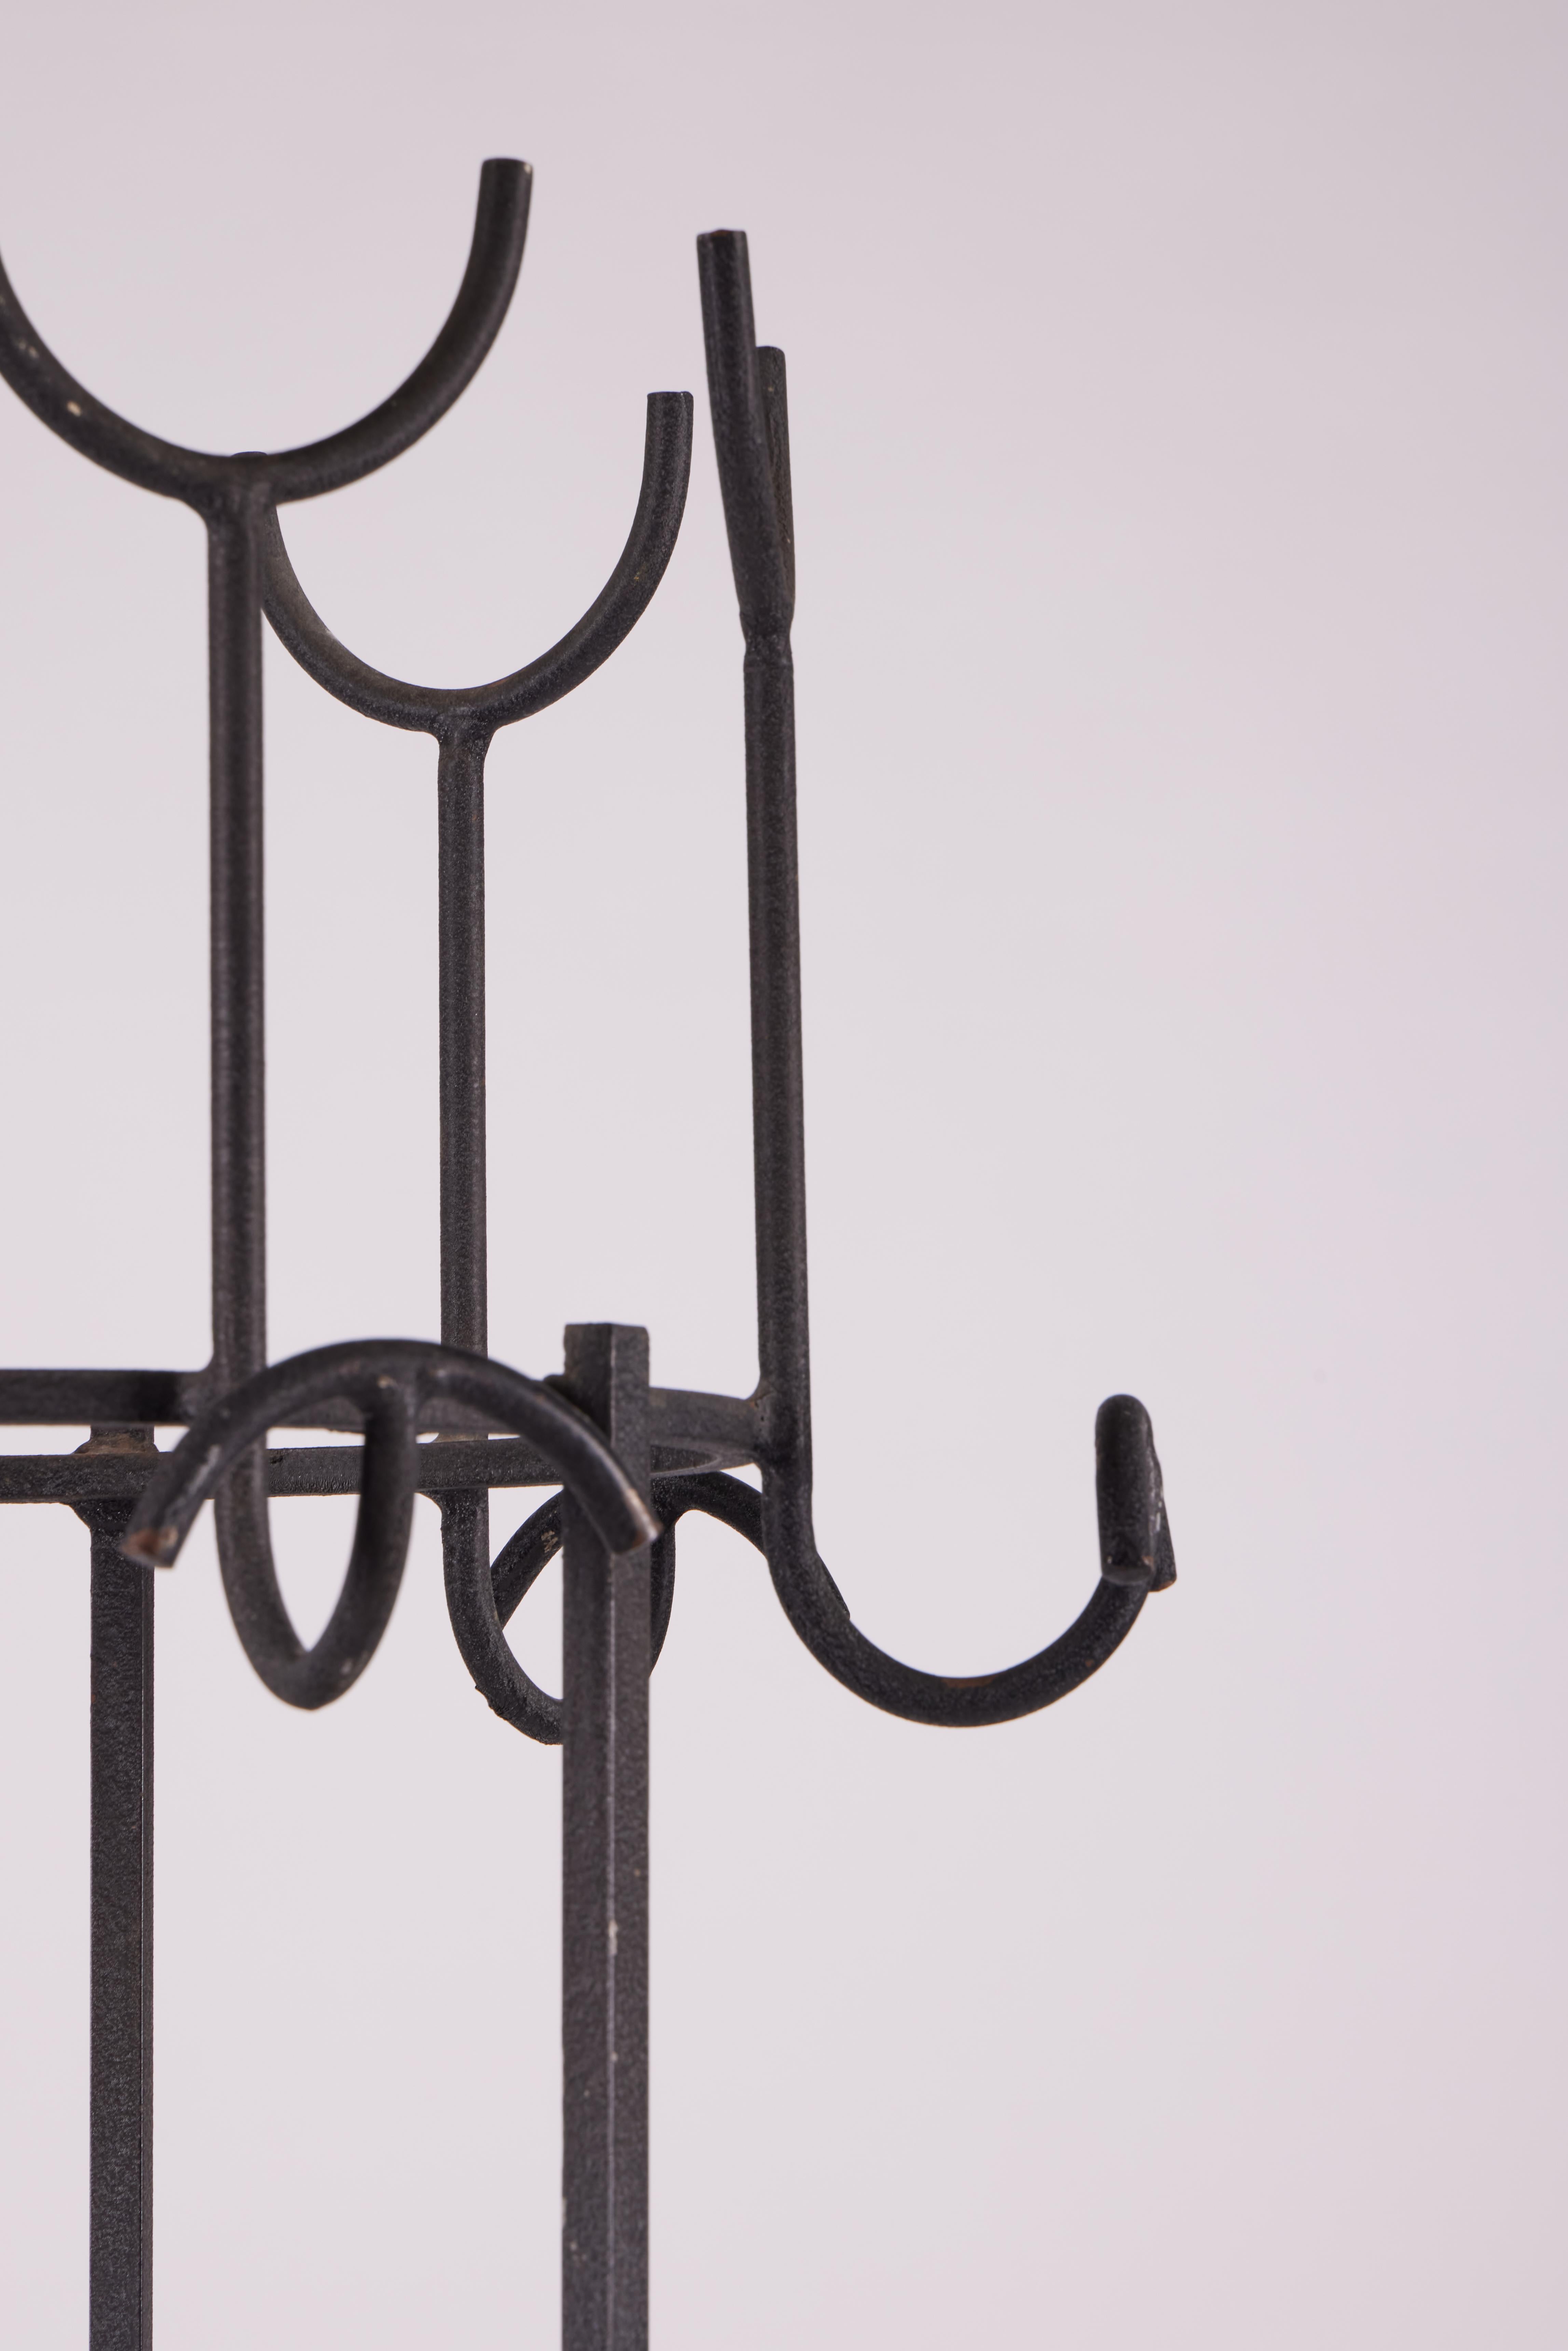 Campo Graffi Prisco Wrought Iron Midcentury Coat-Rack, Italy, 1961 In Good Condition For Sale In Milan, IT